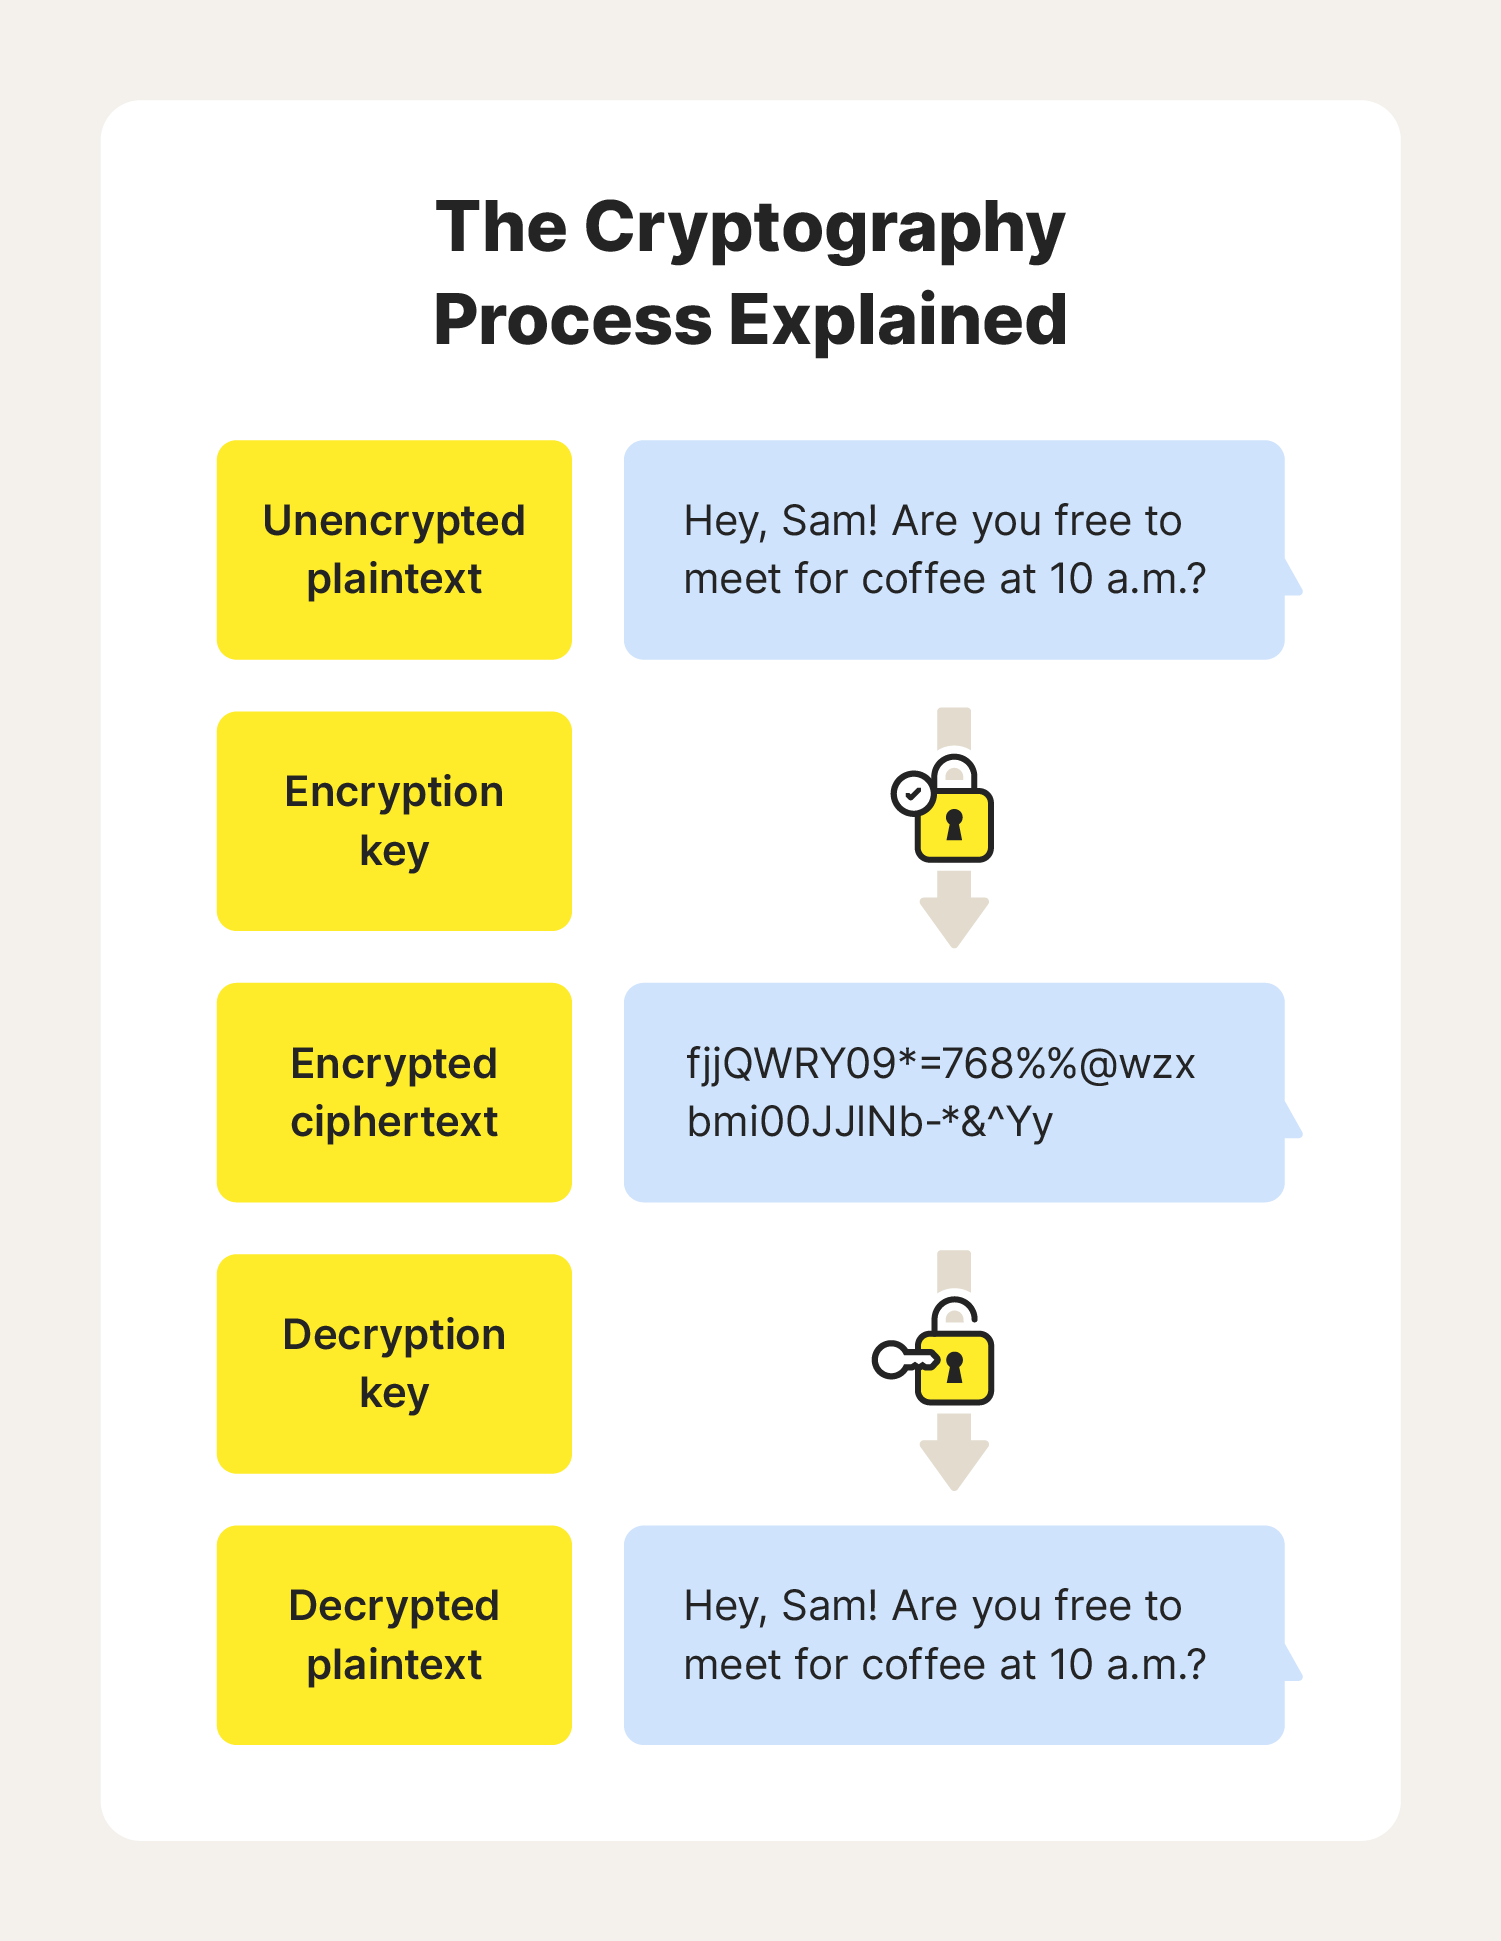 An overview of how cryptography works and what it looks like in action.